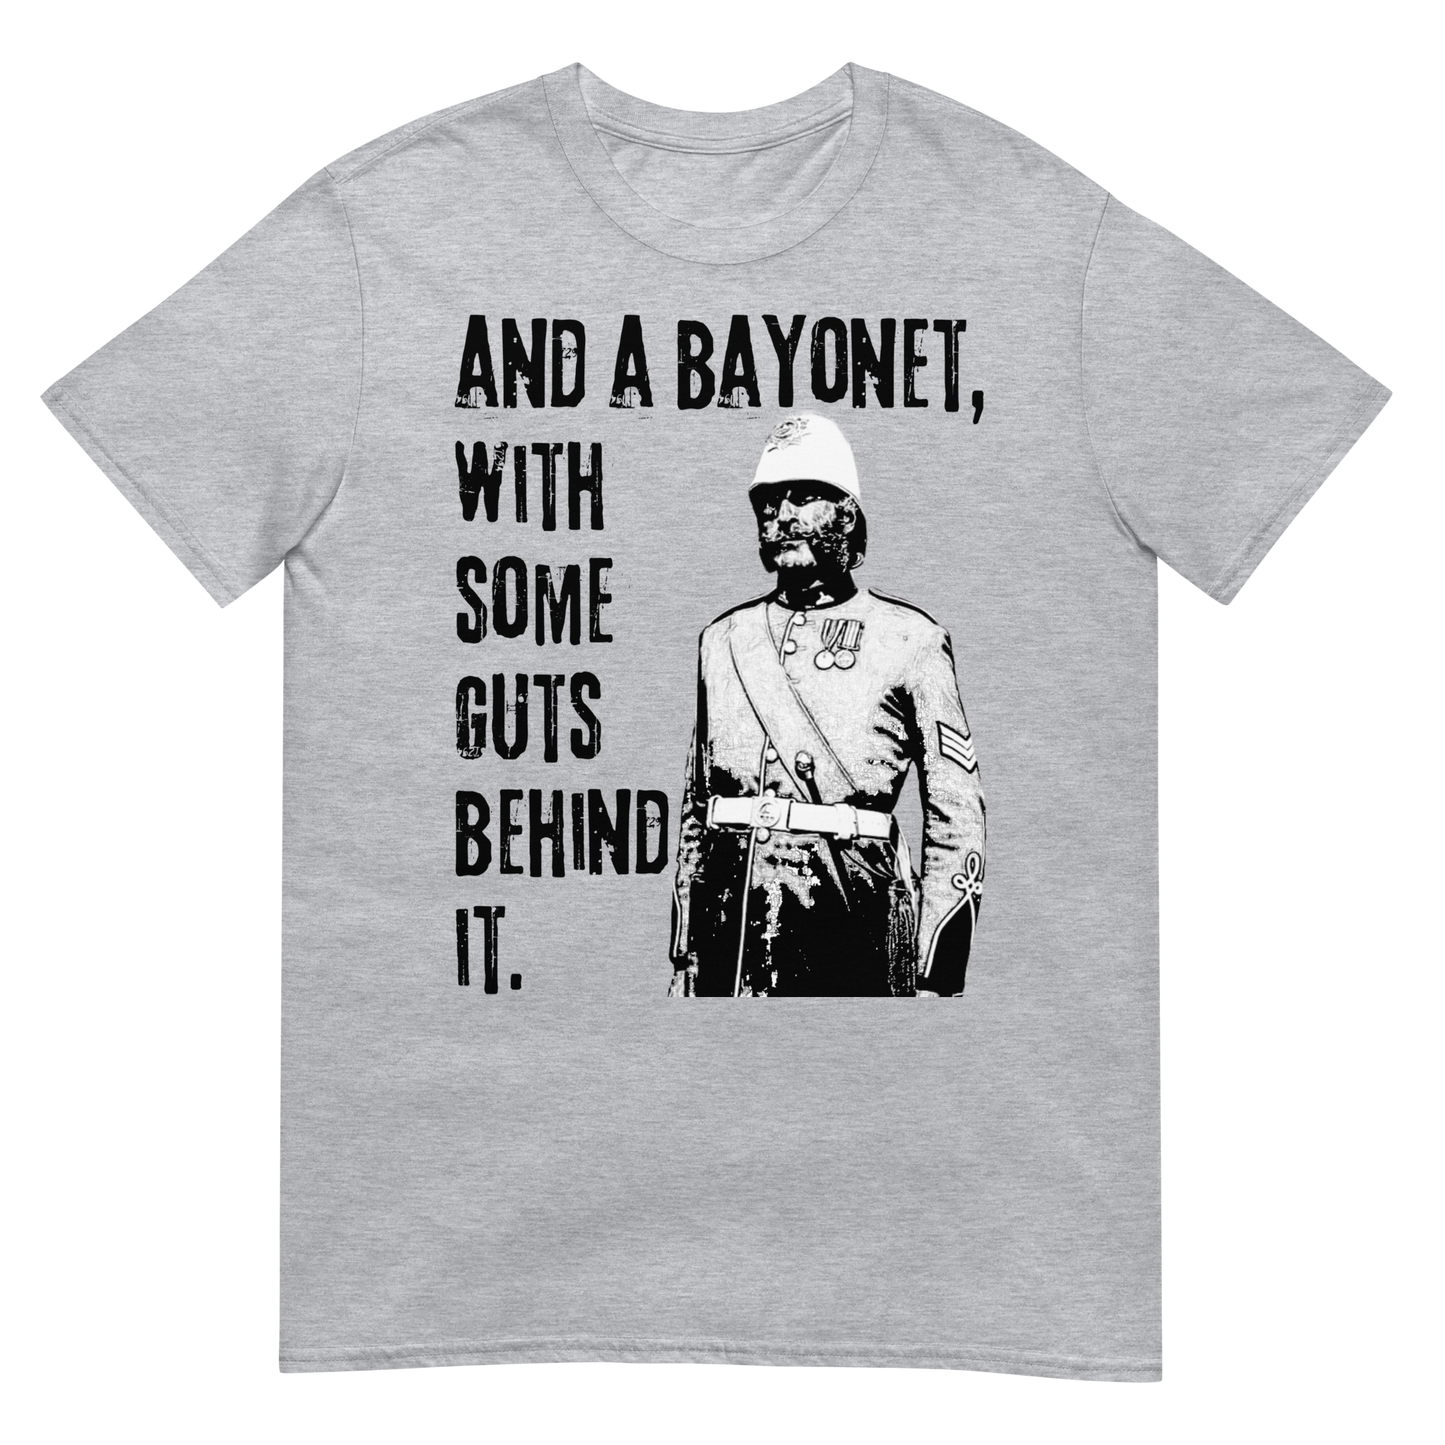 And A Bayonet, With Some Guts Behind It. (t-shirt)